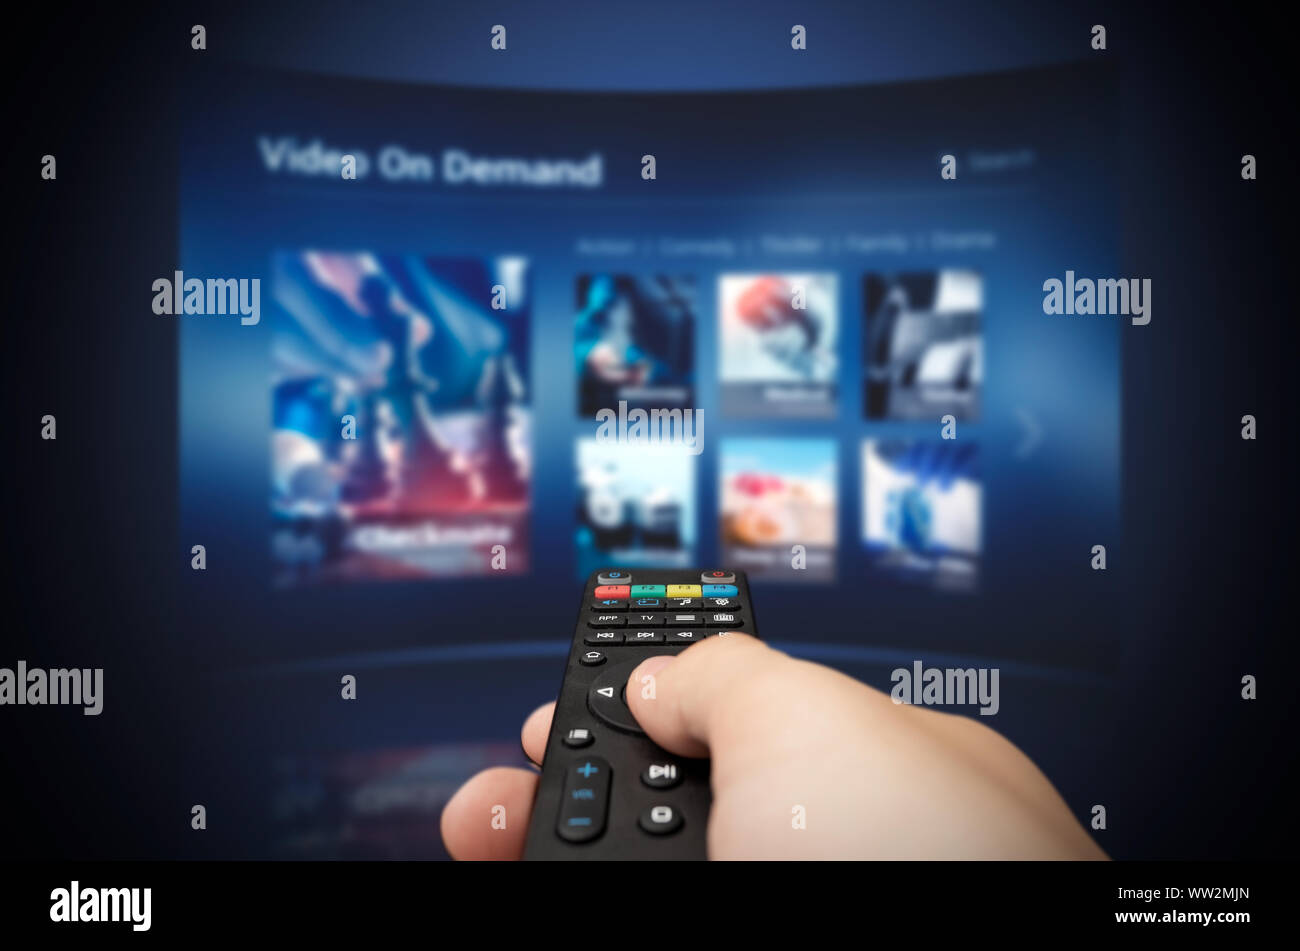 VOD service screen with remote control in hand. Video On Demand television internet stream multimedia concept Stock Photo